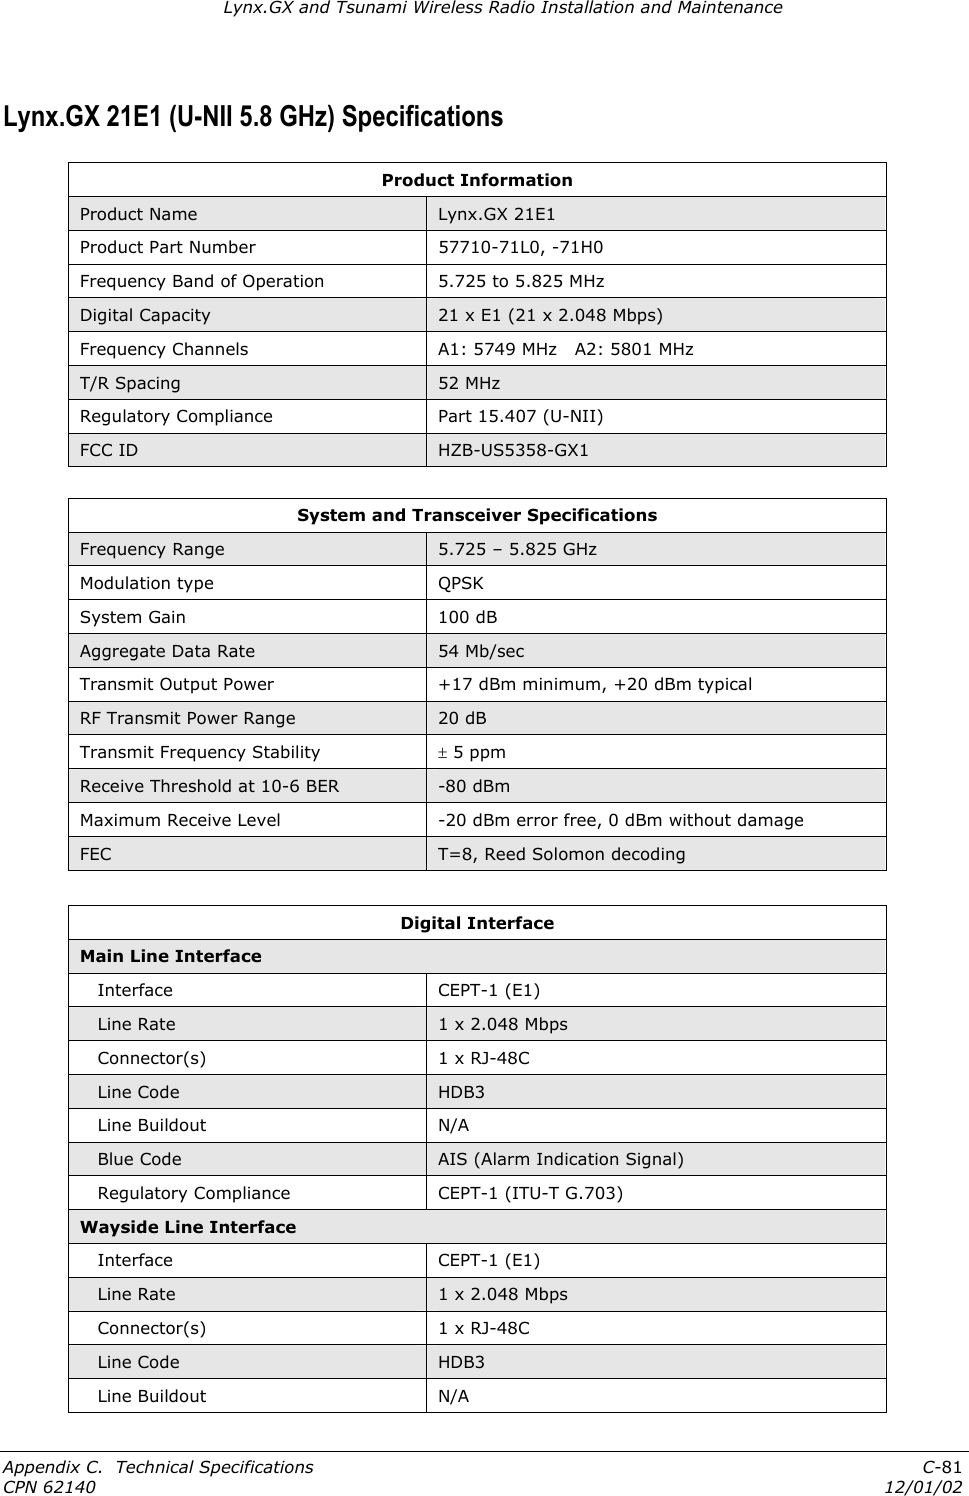 Lynx.GX and Tsunami Wireless Radio Installation and Maintenance Lynx.GX 21E1 (U-NII 5.8 GHz) Specifications    Product Information Product Name  Lynx.GX 21E1  Product Part Number  57710-71L0, -71H0  Frequency Band of Operation  5.725 to 5.825 MHz Digital Capacity  21 x E1 (21 x 2.048 Mbps) Frequency Channels  A1: 5749 MHz   A2: 5801 MHz T/R Spacing  52 MHz Regulatory Compliance  Part 15.407 (U-NII) FCC ID  HZB-US5358-GX1  System and Transceiver Specifications Frequency Range  5.725 – 5.825 GHz Modulation type  QPSK System Gain  100 dB Aggregate Data Rate  54 Mb/sec Transmit Output Power  +17 dBm minimum, +20 dBm typical RF Transmit Power Range  20 dB Transmit Frequency Stability  ± 5 ppm  Receive Threshold at 10-6 BER  -80 dBm Maximum Receive Level  -20 dBm error free, 0 dBm without damage FEC  T=8, Reed Solomon decoding  Digital Interface Main Line Interface    Interface  CEPT-1 (E1)     Line Rate  1 x 2.048 Mbps    Connector(s)  1 x RJ-48C    Line Code  HDB3    Line Buildout  N/A    Blue Code  AIS (Alarm Indication Signal)    Regulatory Compliance  CEPT-1 (ITU-T G.703) Wayside Line Interface    Interface  CEPT-1 (E1)     Line Rate  1 x 2.048 Mbps    Connector(s)  1 x RJ-48C    Line Code  HDB3    Line Buildout  N/A Appendix C.  Technical Specifications  C-81 CPN 62140  12/01/02 